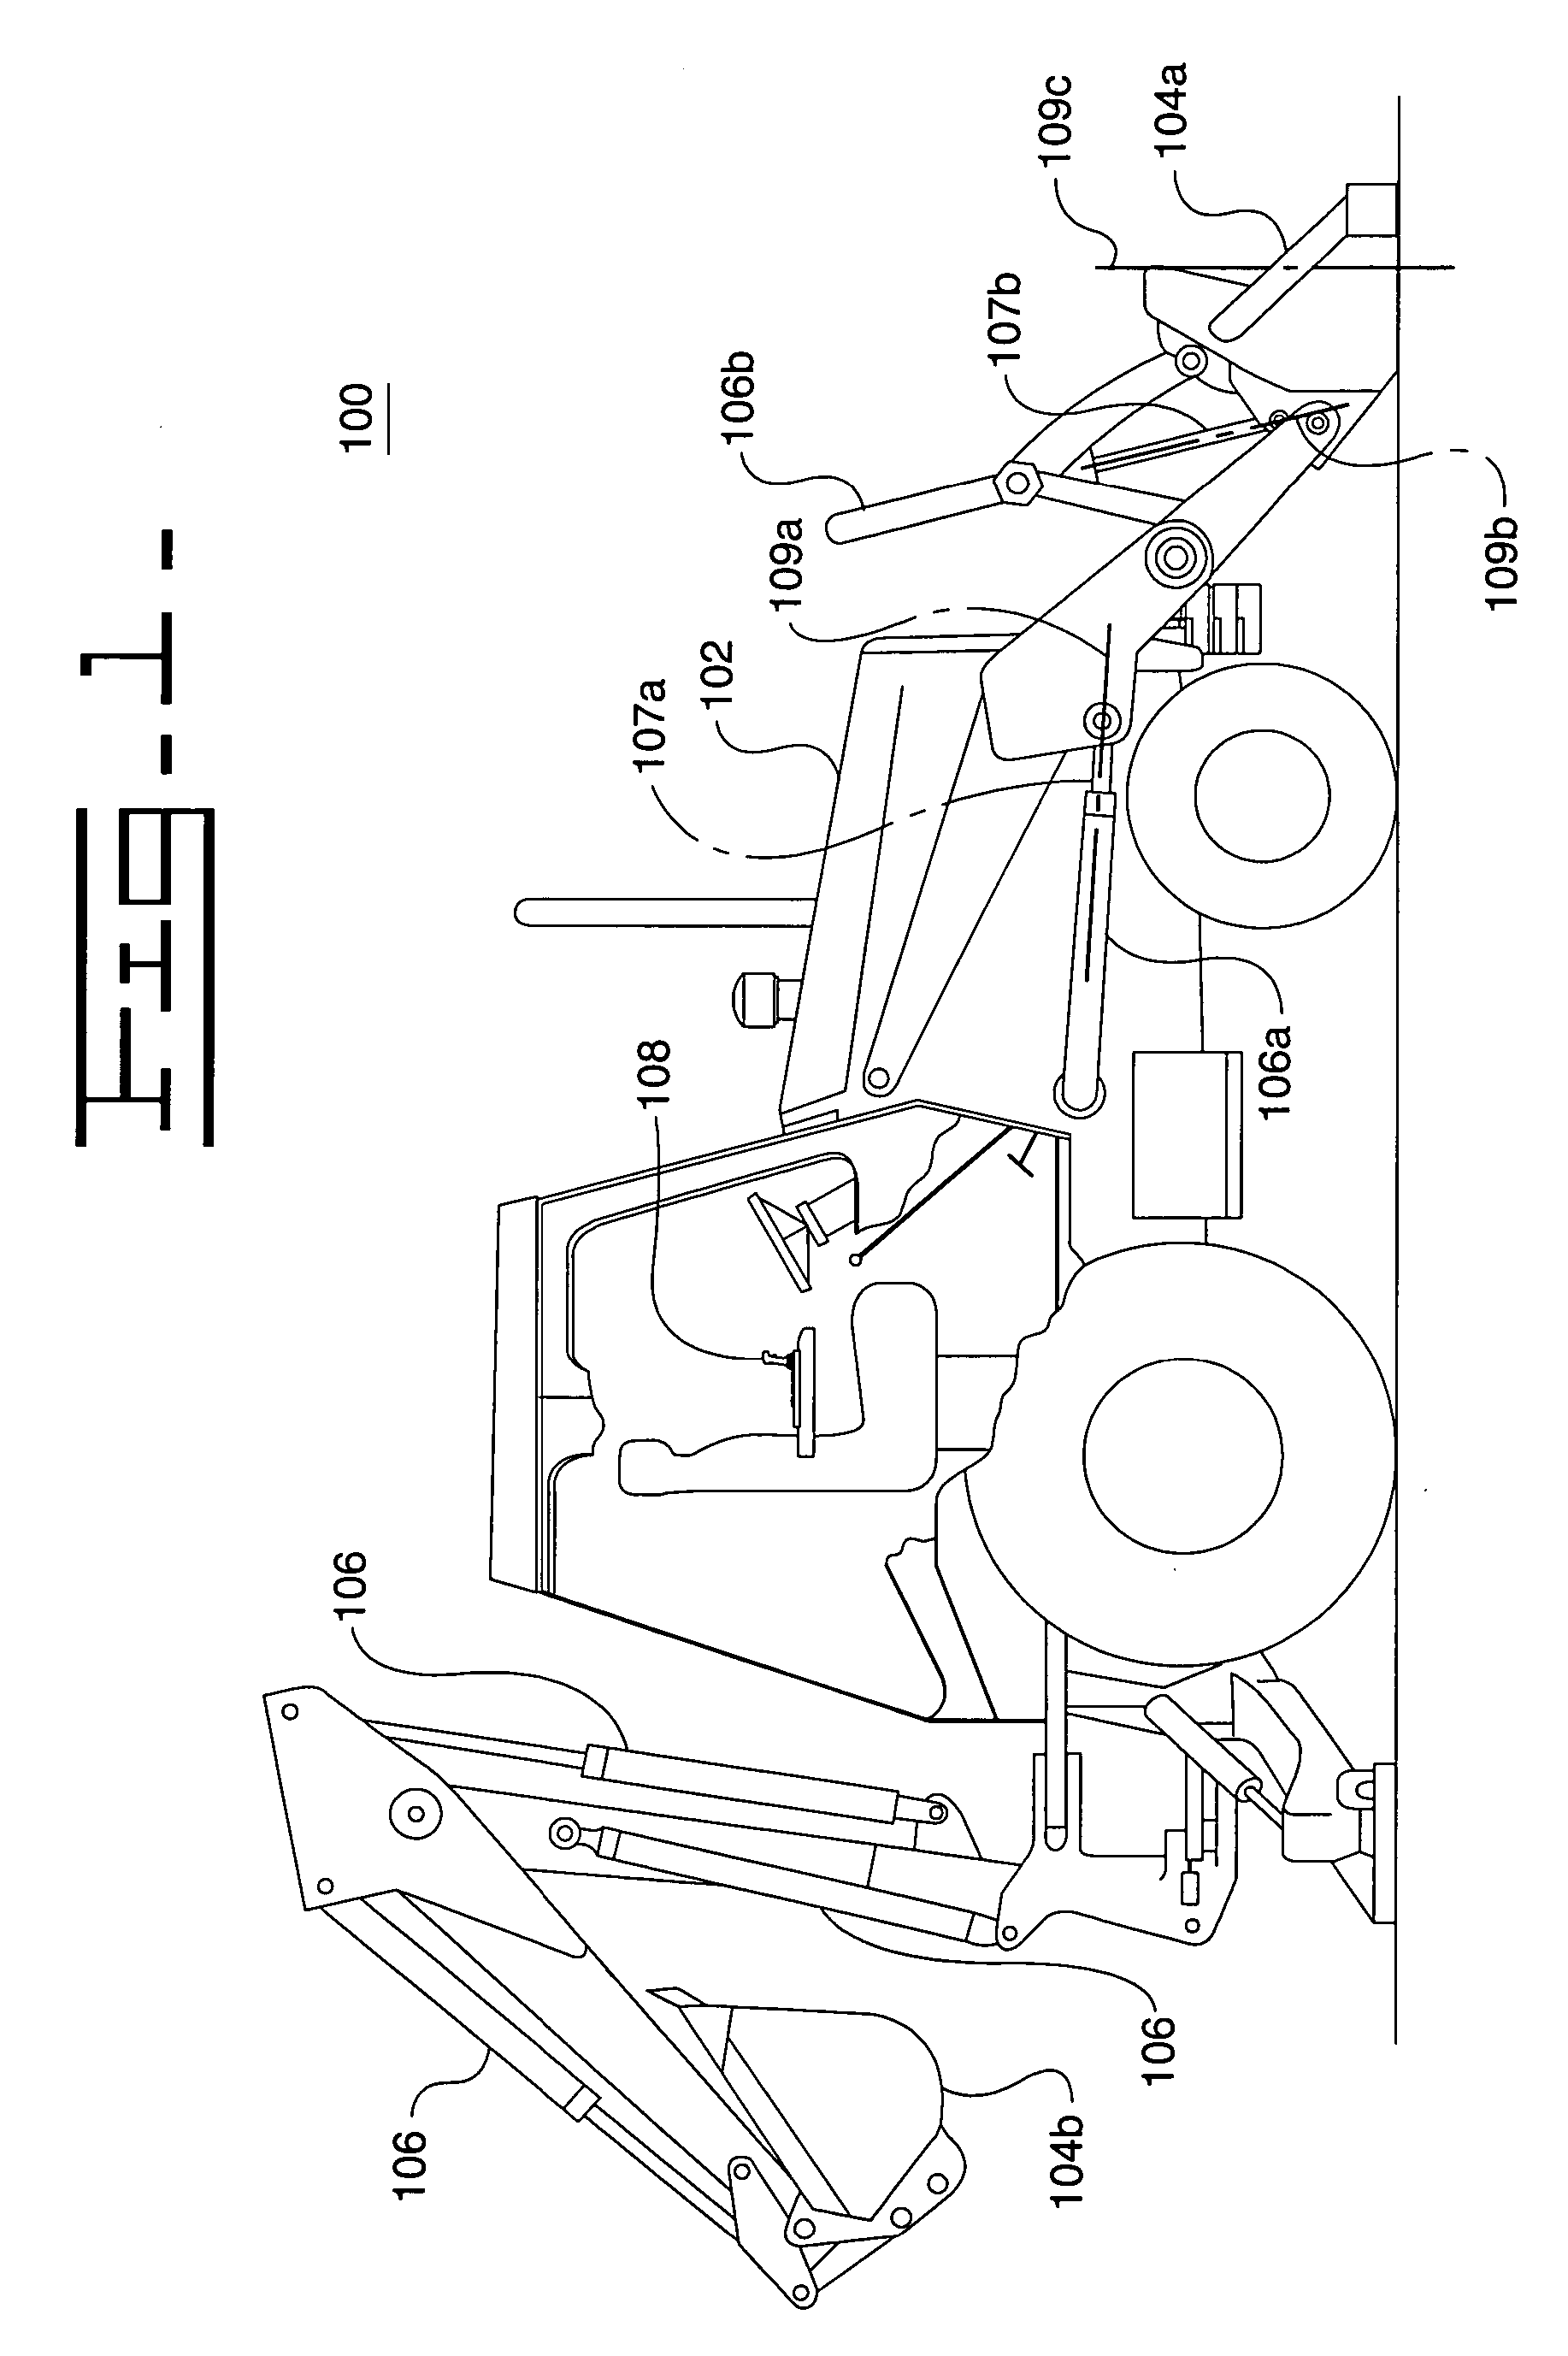 Apparatus and method for controlling work tool vibration